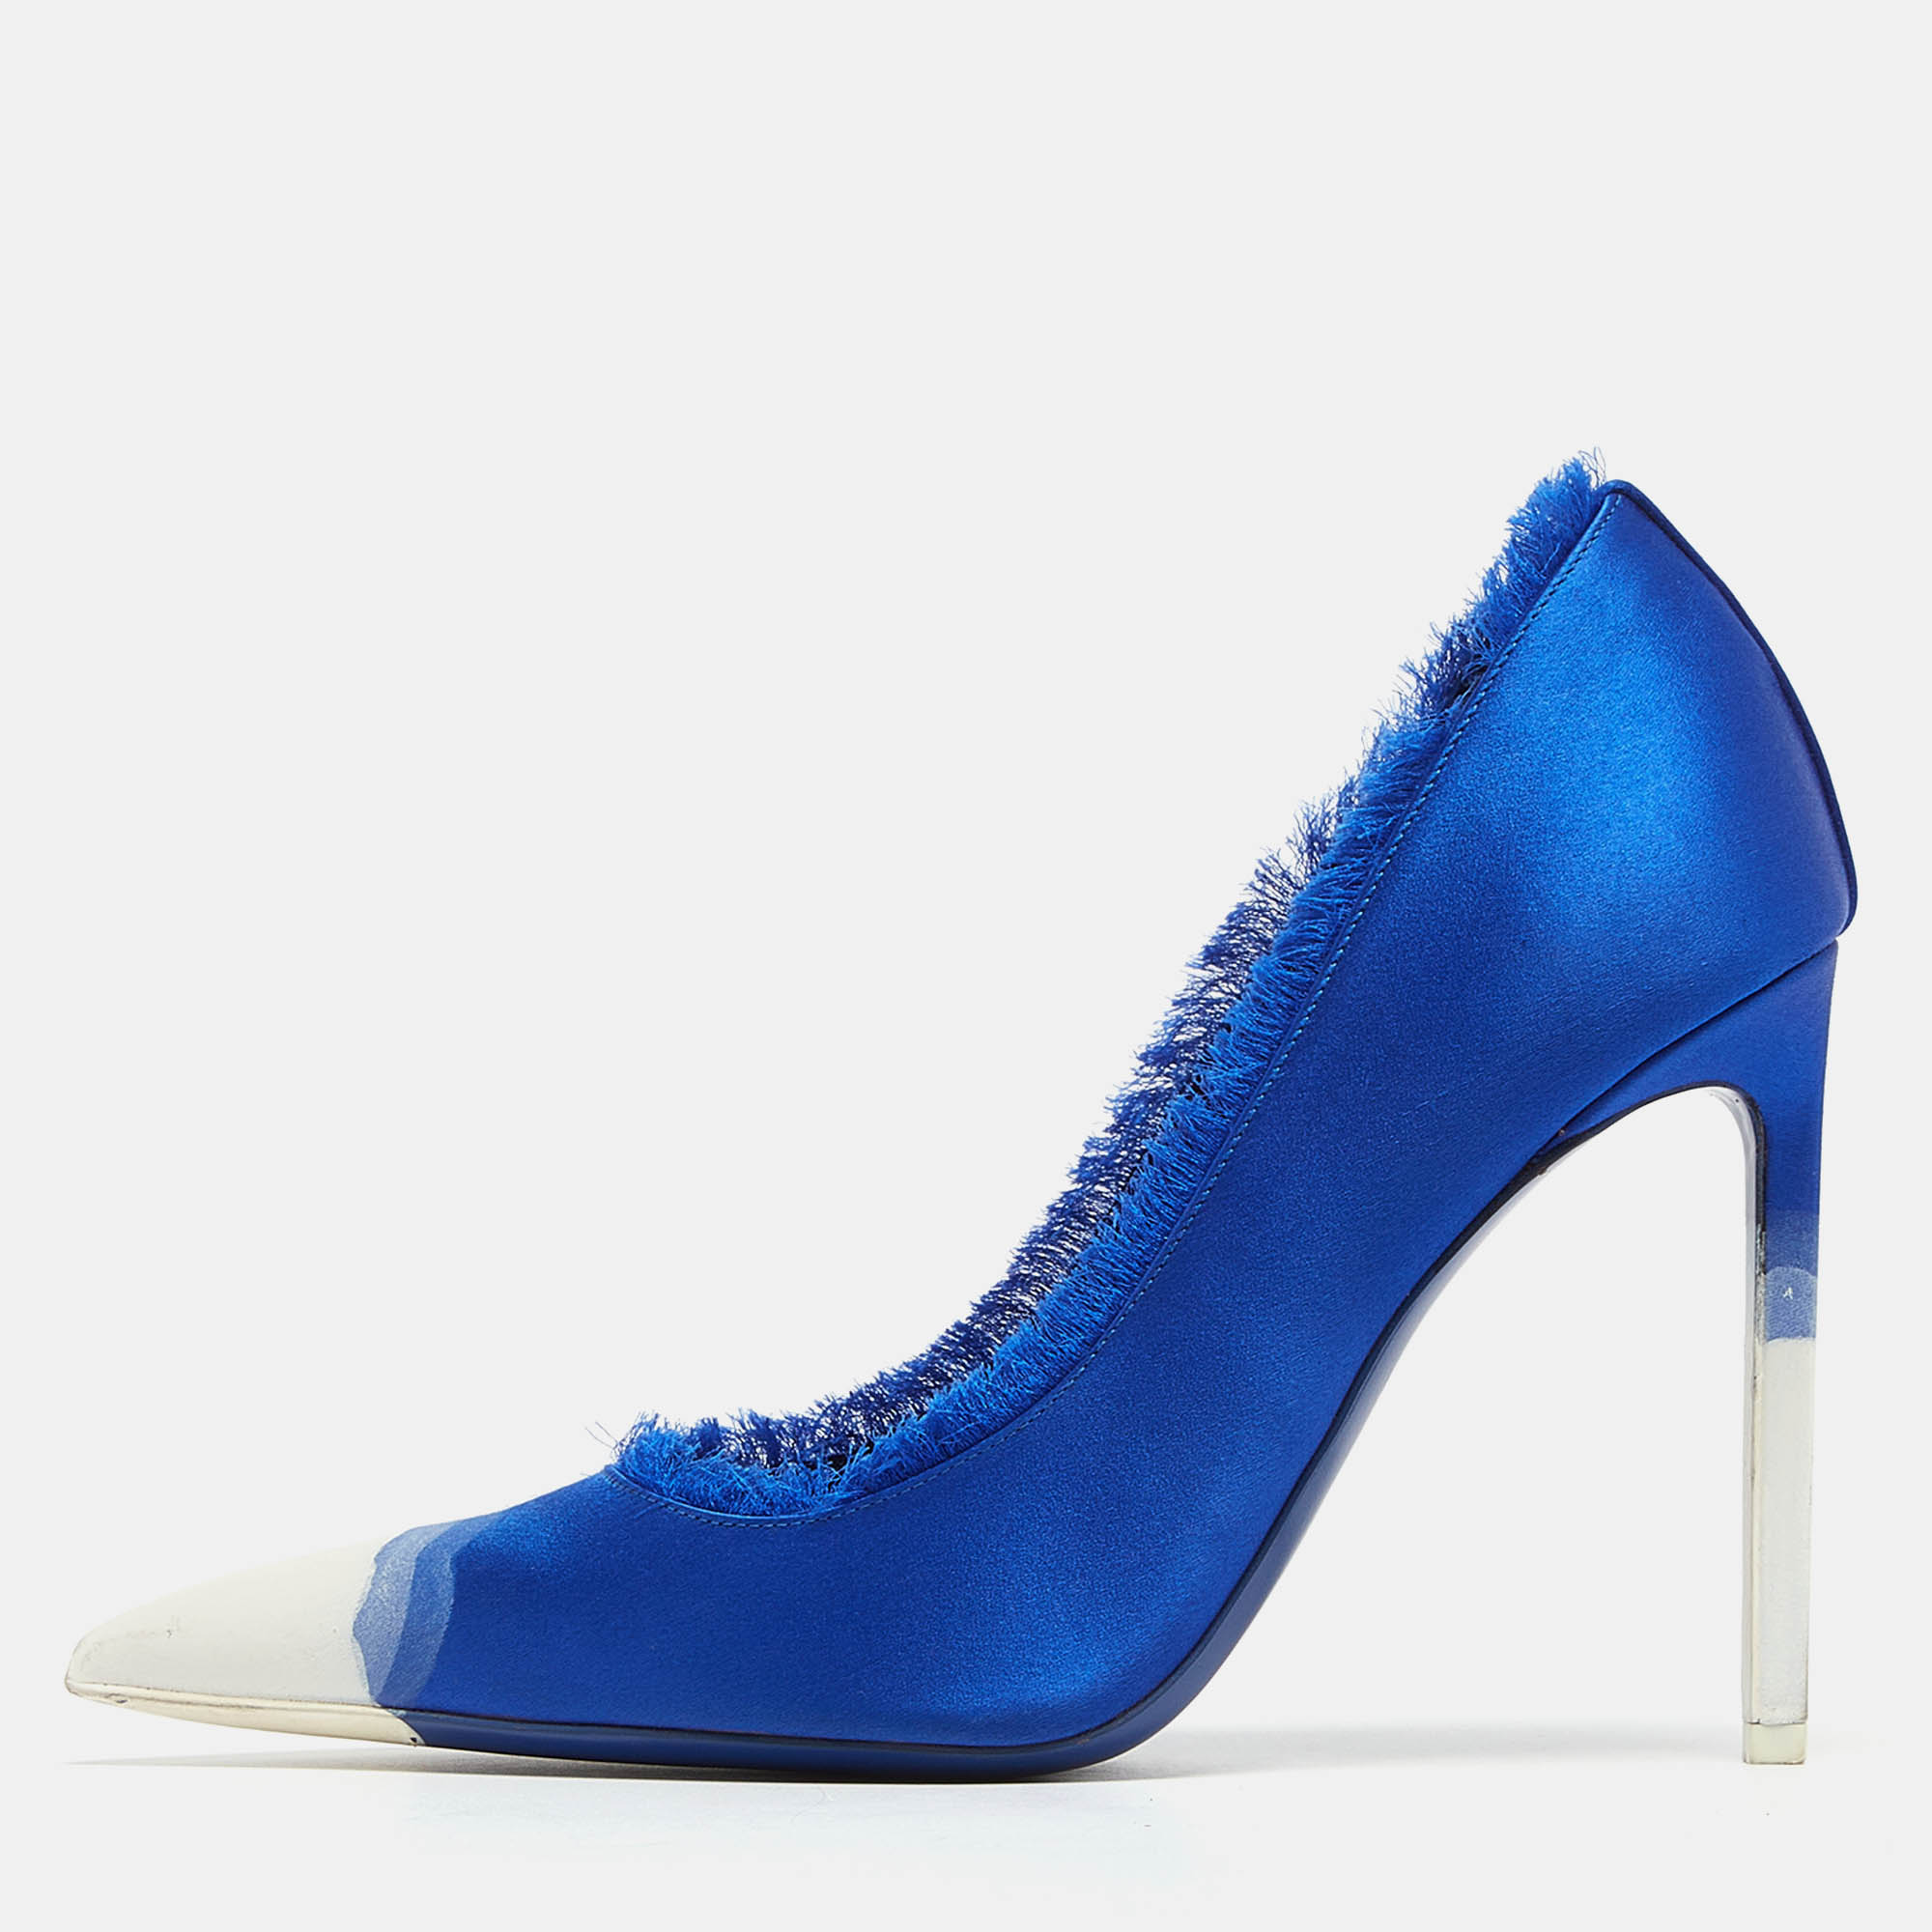 Pre-owned Tom Ford Blue/white Fringed Satin Pointed Toe Pumps Size 39.5